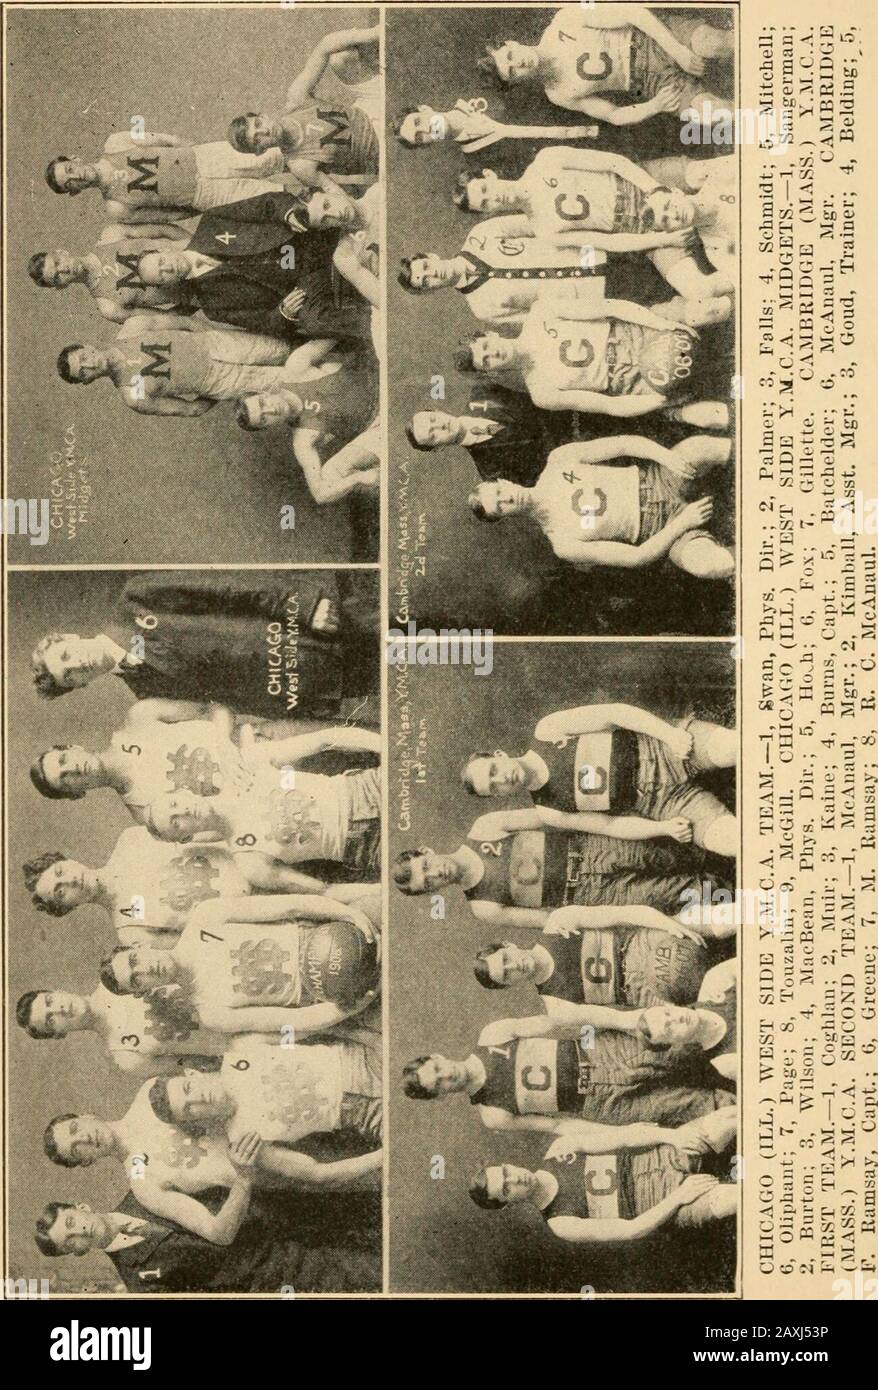 Official A.A.Ubasketball guide . Troy E.B. 30—27; Schenectady High School37—.32. Lost—To Hudson Y.M.C.A. 18—23; Albany Team 23—32; HudsonY.M.C.A. 18—23. ENTRE NOUS, MIDDLETOWN, N.Y. Won—From Damascus Cracks 26-18, 35—13; Fallsburg 22—5, 19—14, 35—4; Libertv 43—5. 63—17; White Lake Tigers 18—16, 23—7. Lost—ToRegulars 6—12; Middletown High School 16—17. FAIRBURY (NEB.) HIGH SCHOOL. Won—From Pawnee Citv 11—0, 4—0; Belleville (Kan.) 11—0; Clyde(Kan.) 9—0; Beatrice 6—0. FORDHAM (N.Y.) PREP. TEAM. Won—From Erasmus Hall 26—16: Cathedral College 36—^24. Lost—ToPolv Prep 15—62; Manual Training 18—34; M Stock Photo